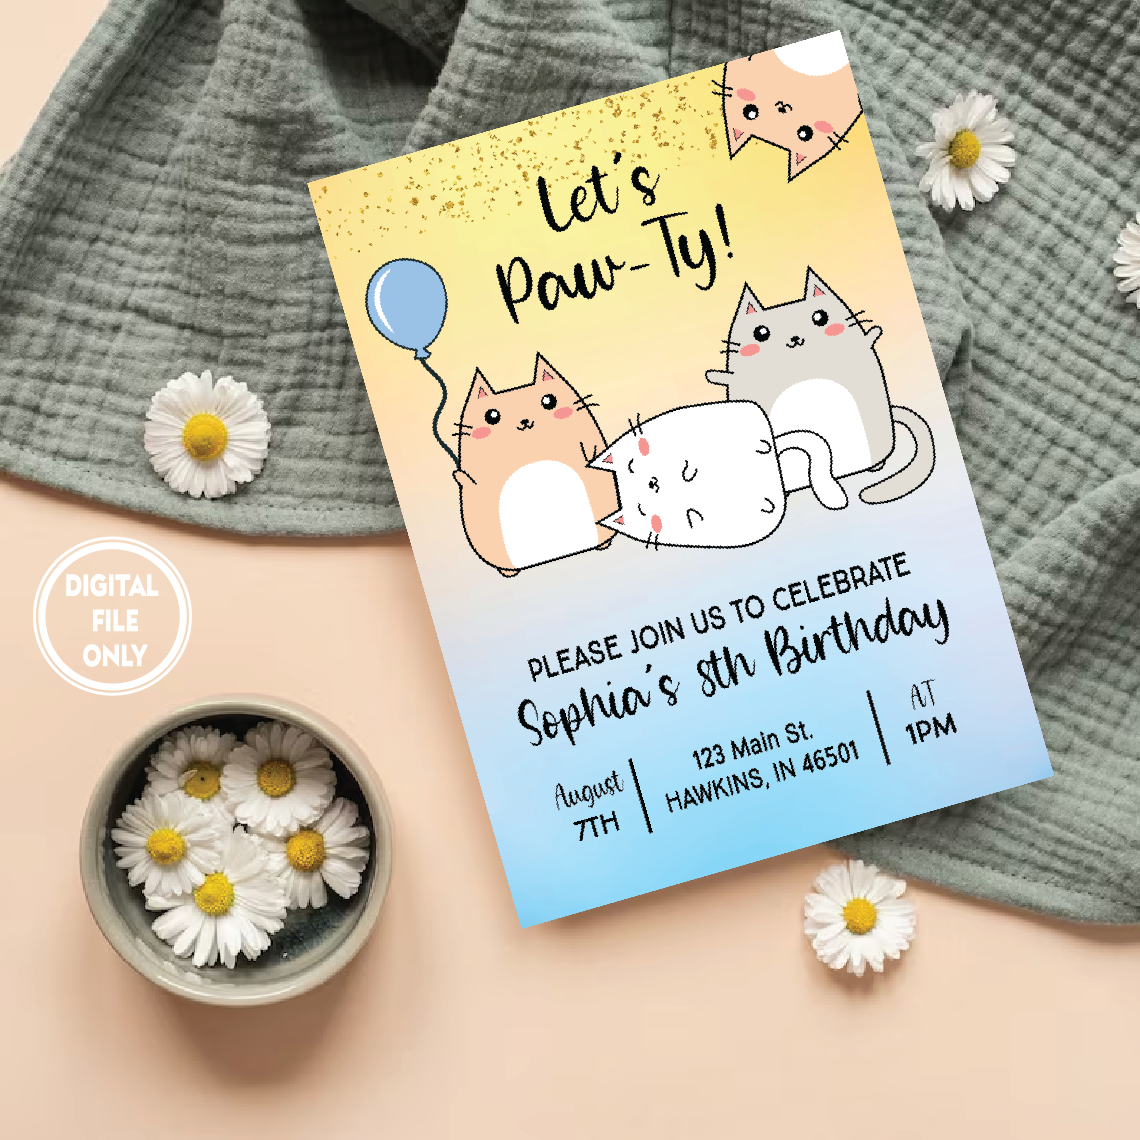 Personalized File Cat Birthday Invitation Png, Cat Theme Birthday Invitation Png, Are You Kitten Me Birthday, Invitation PNG File Only